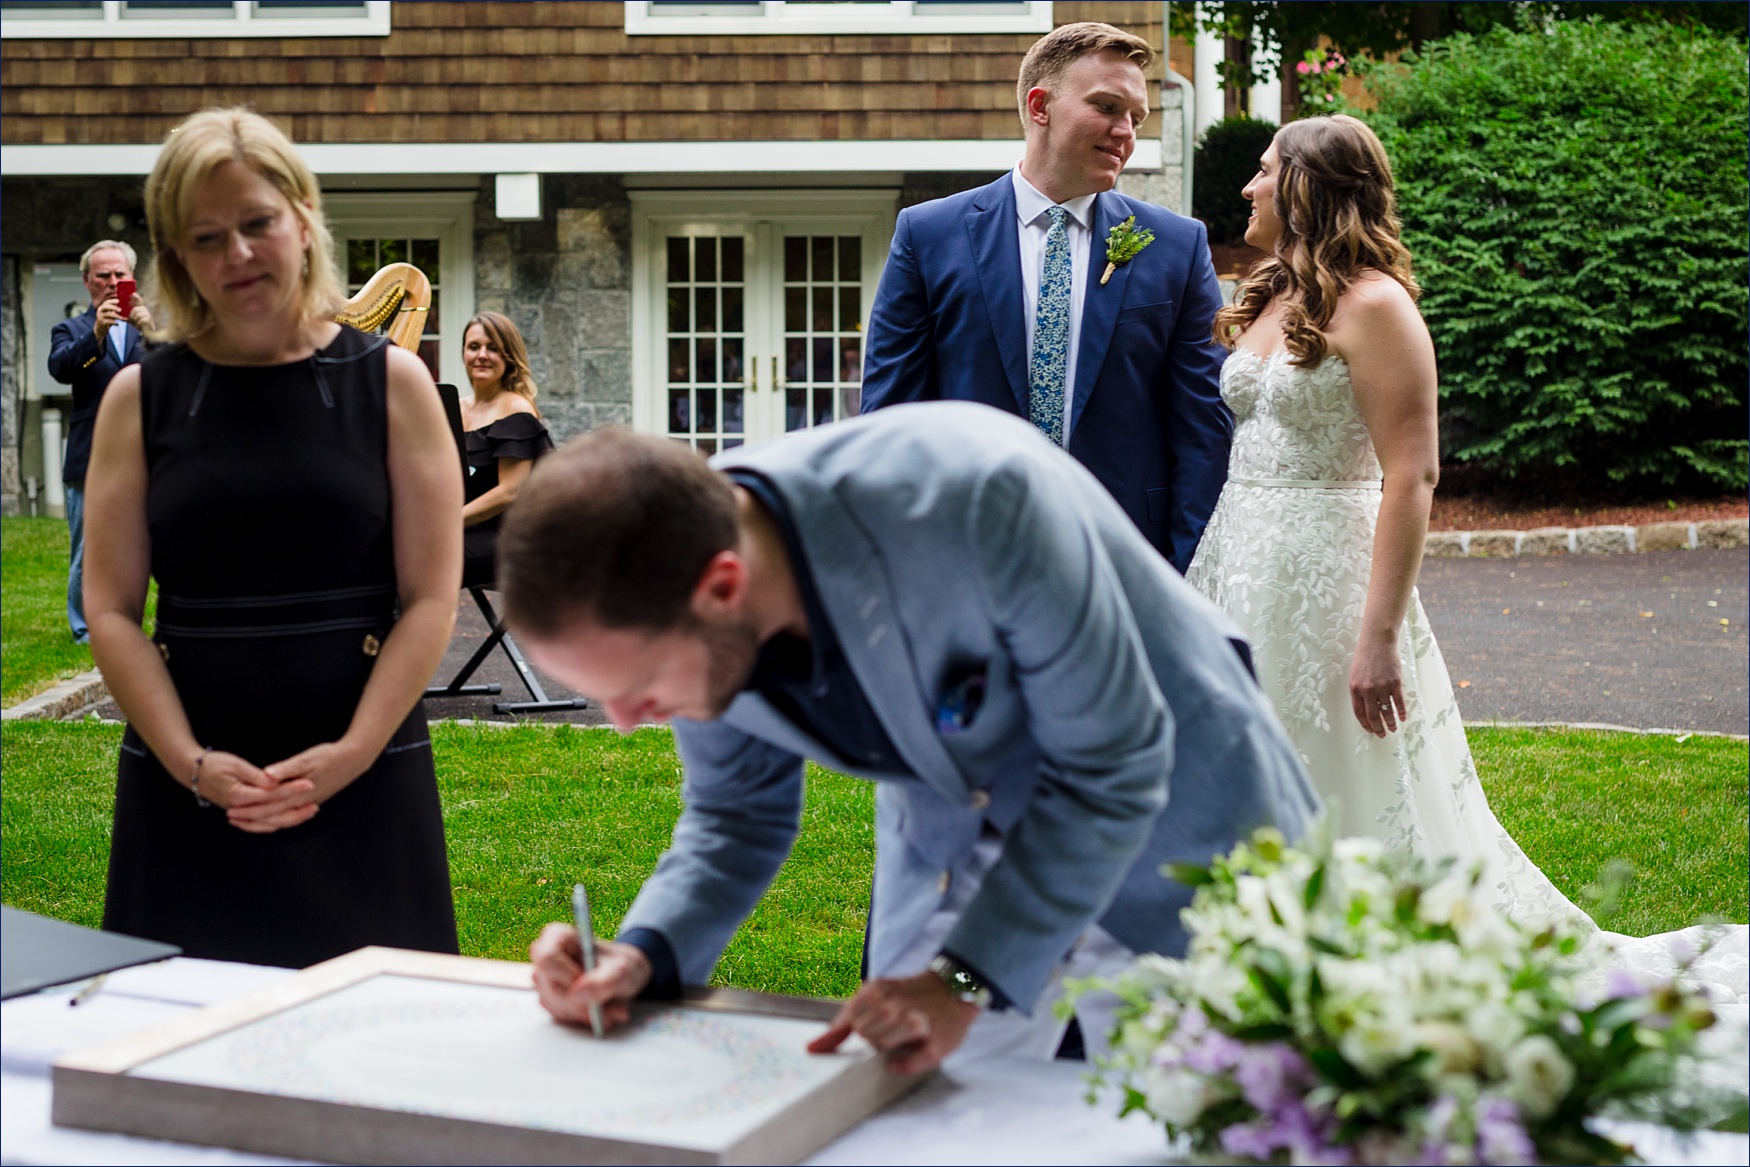 The couple beams at one another at the signing of the Ketubah